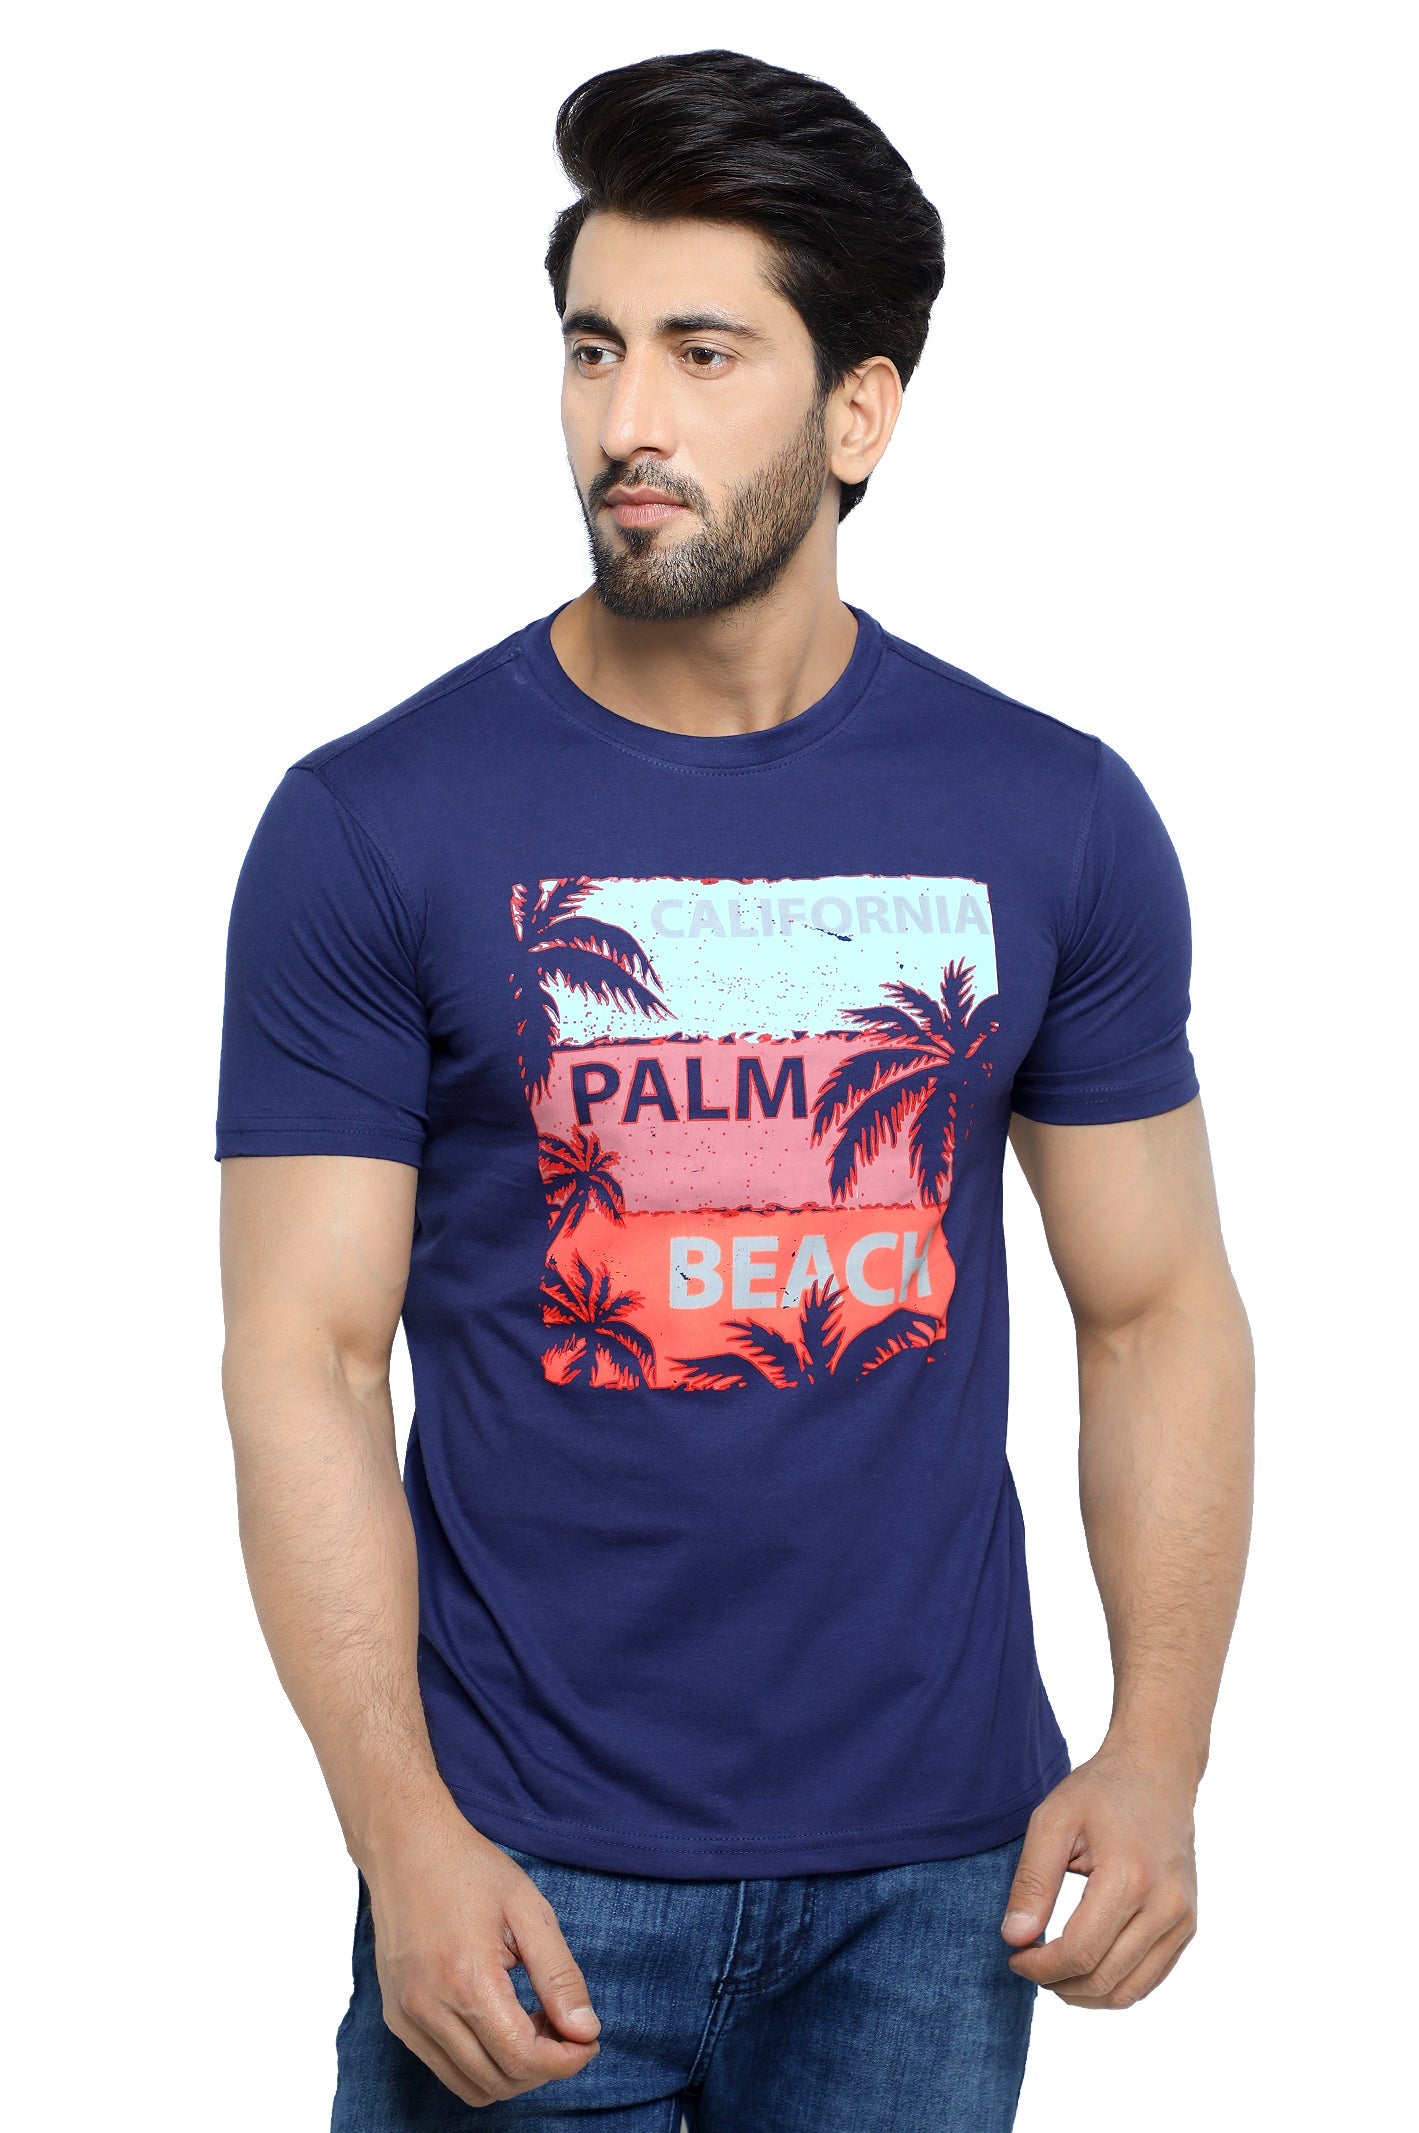 Diners Mens Round Neck T-Shirt SKU: NA800-N-BLUE - Diners